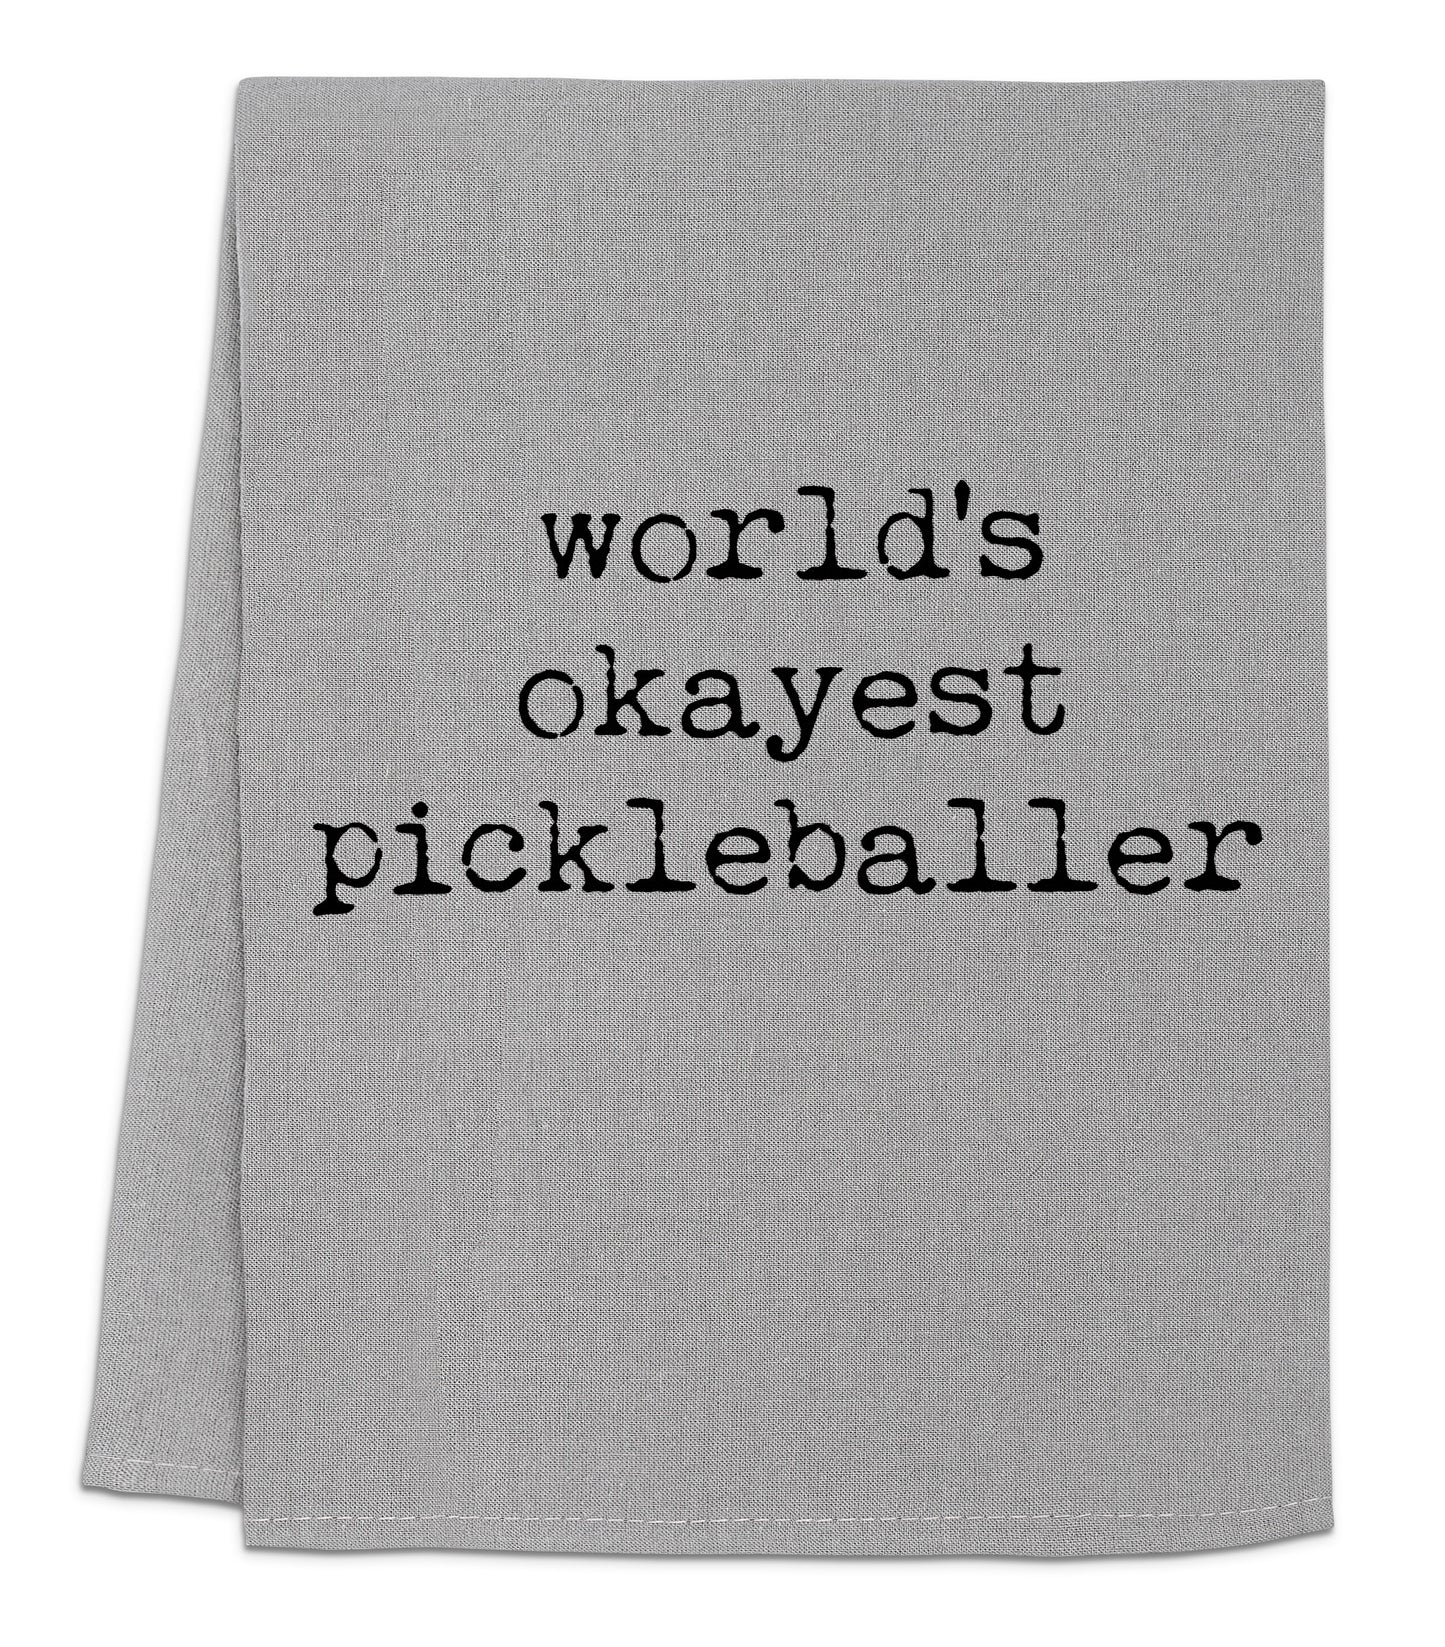 a towel that says world's okayest pickleballer